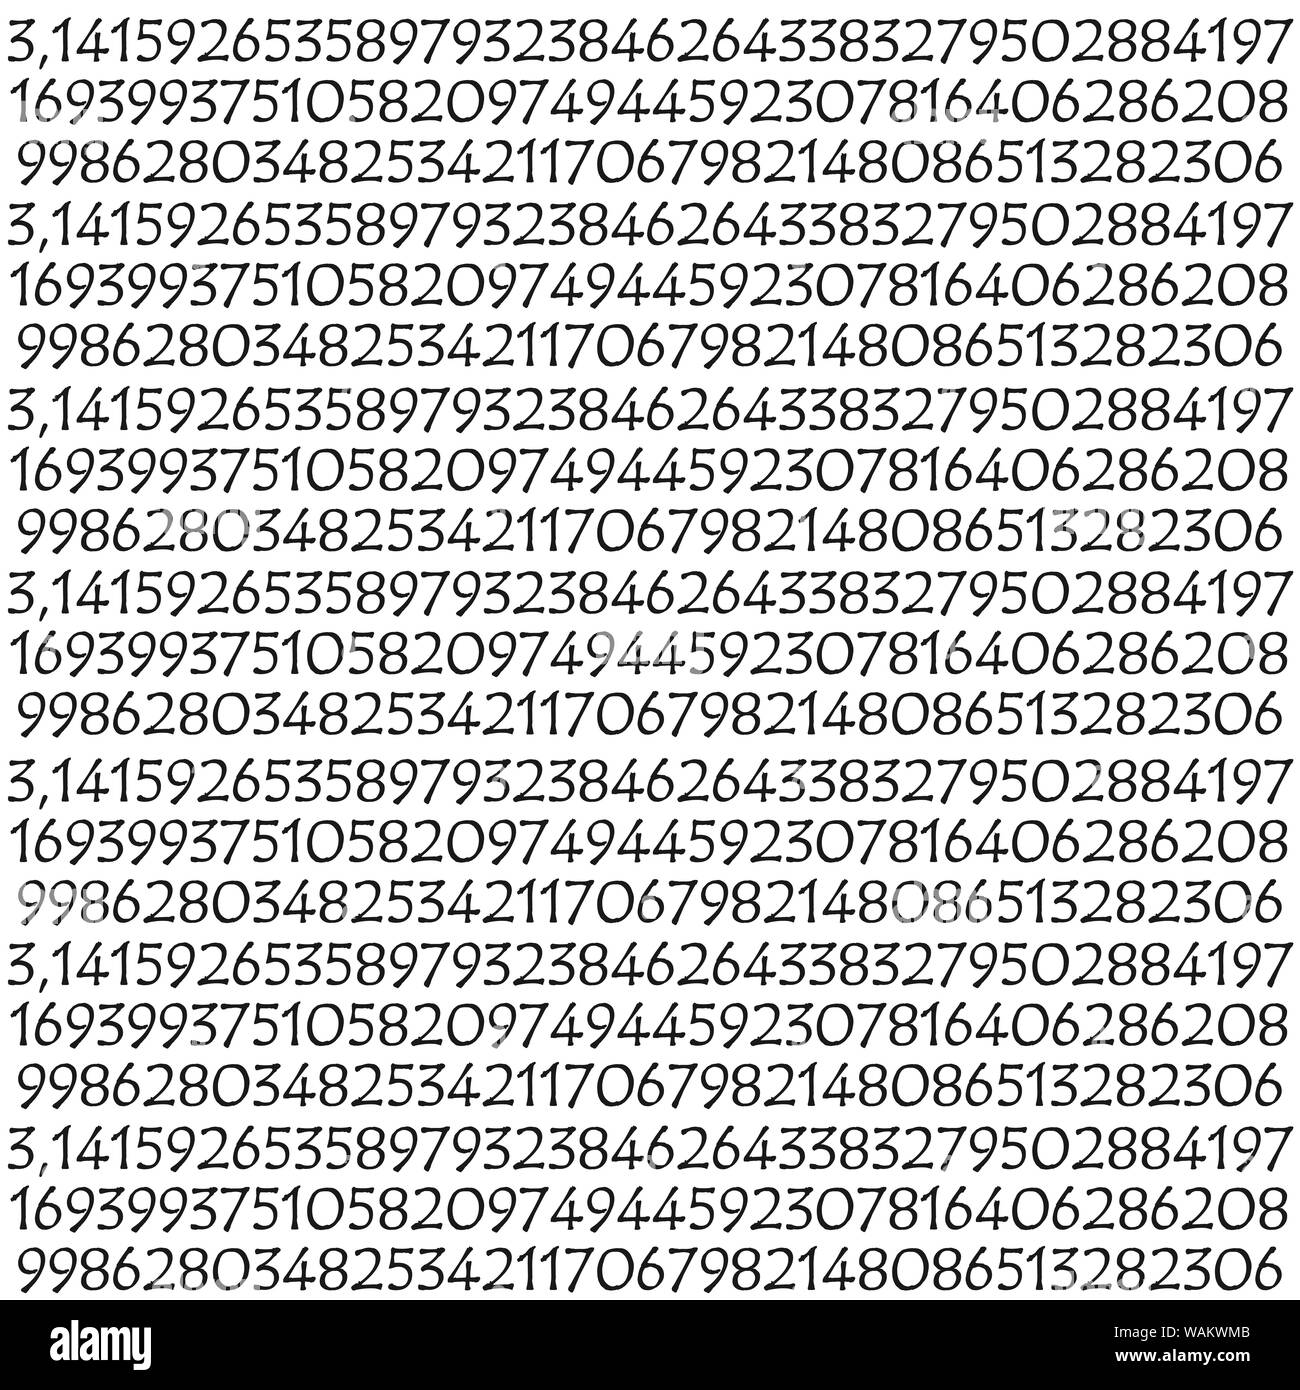 The Pi symbol mathematical constant irrational number, greek letter,  background Stock Photo - Alamy